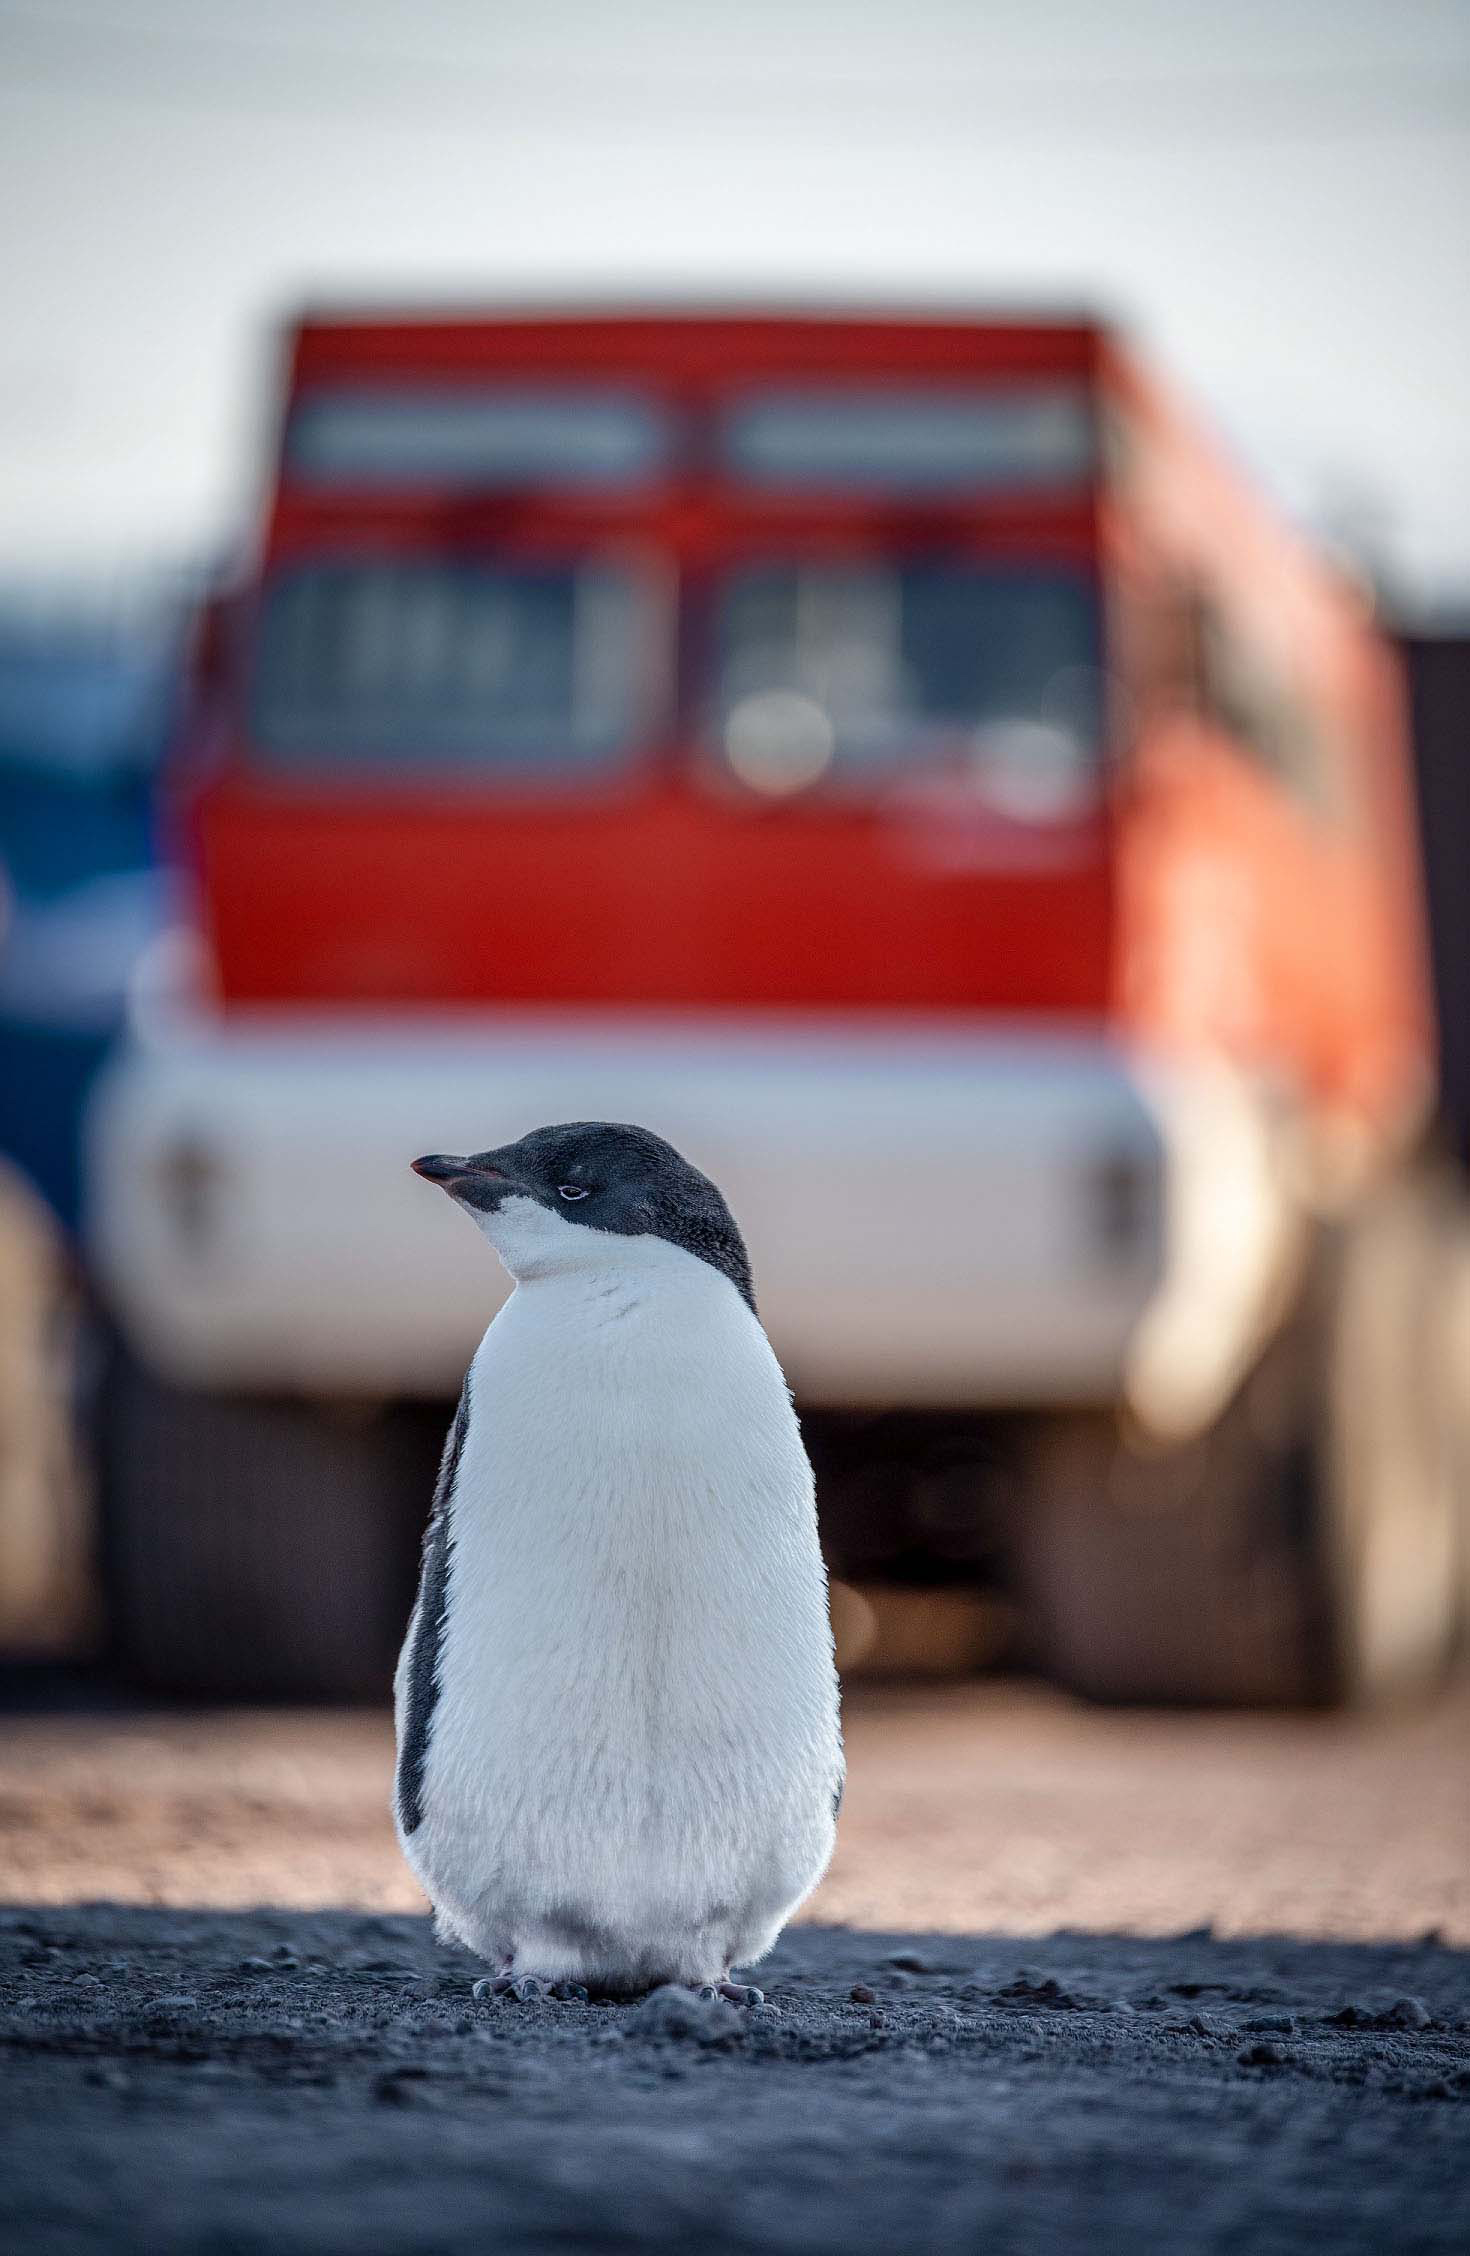 A penguin in the foreground and a large truck in the background.